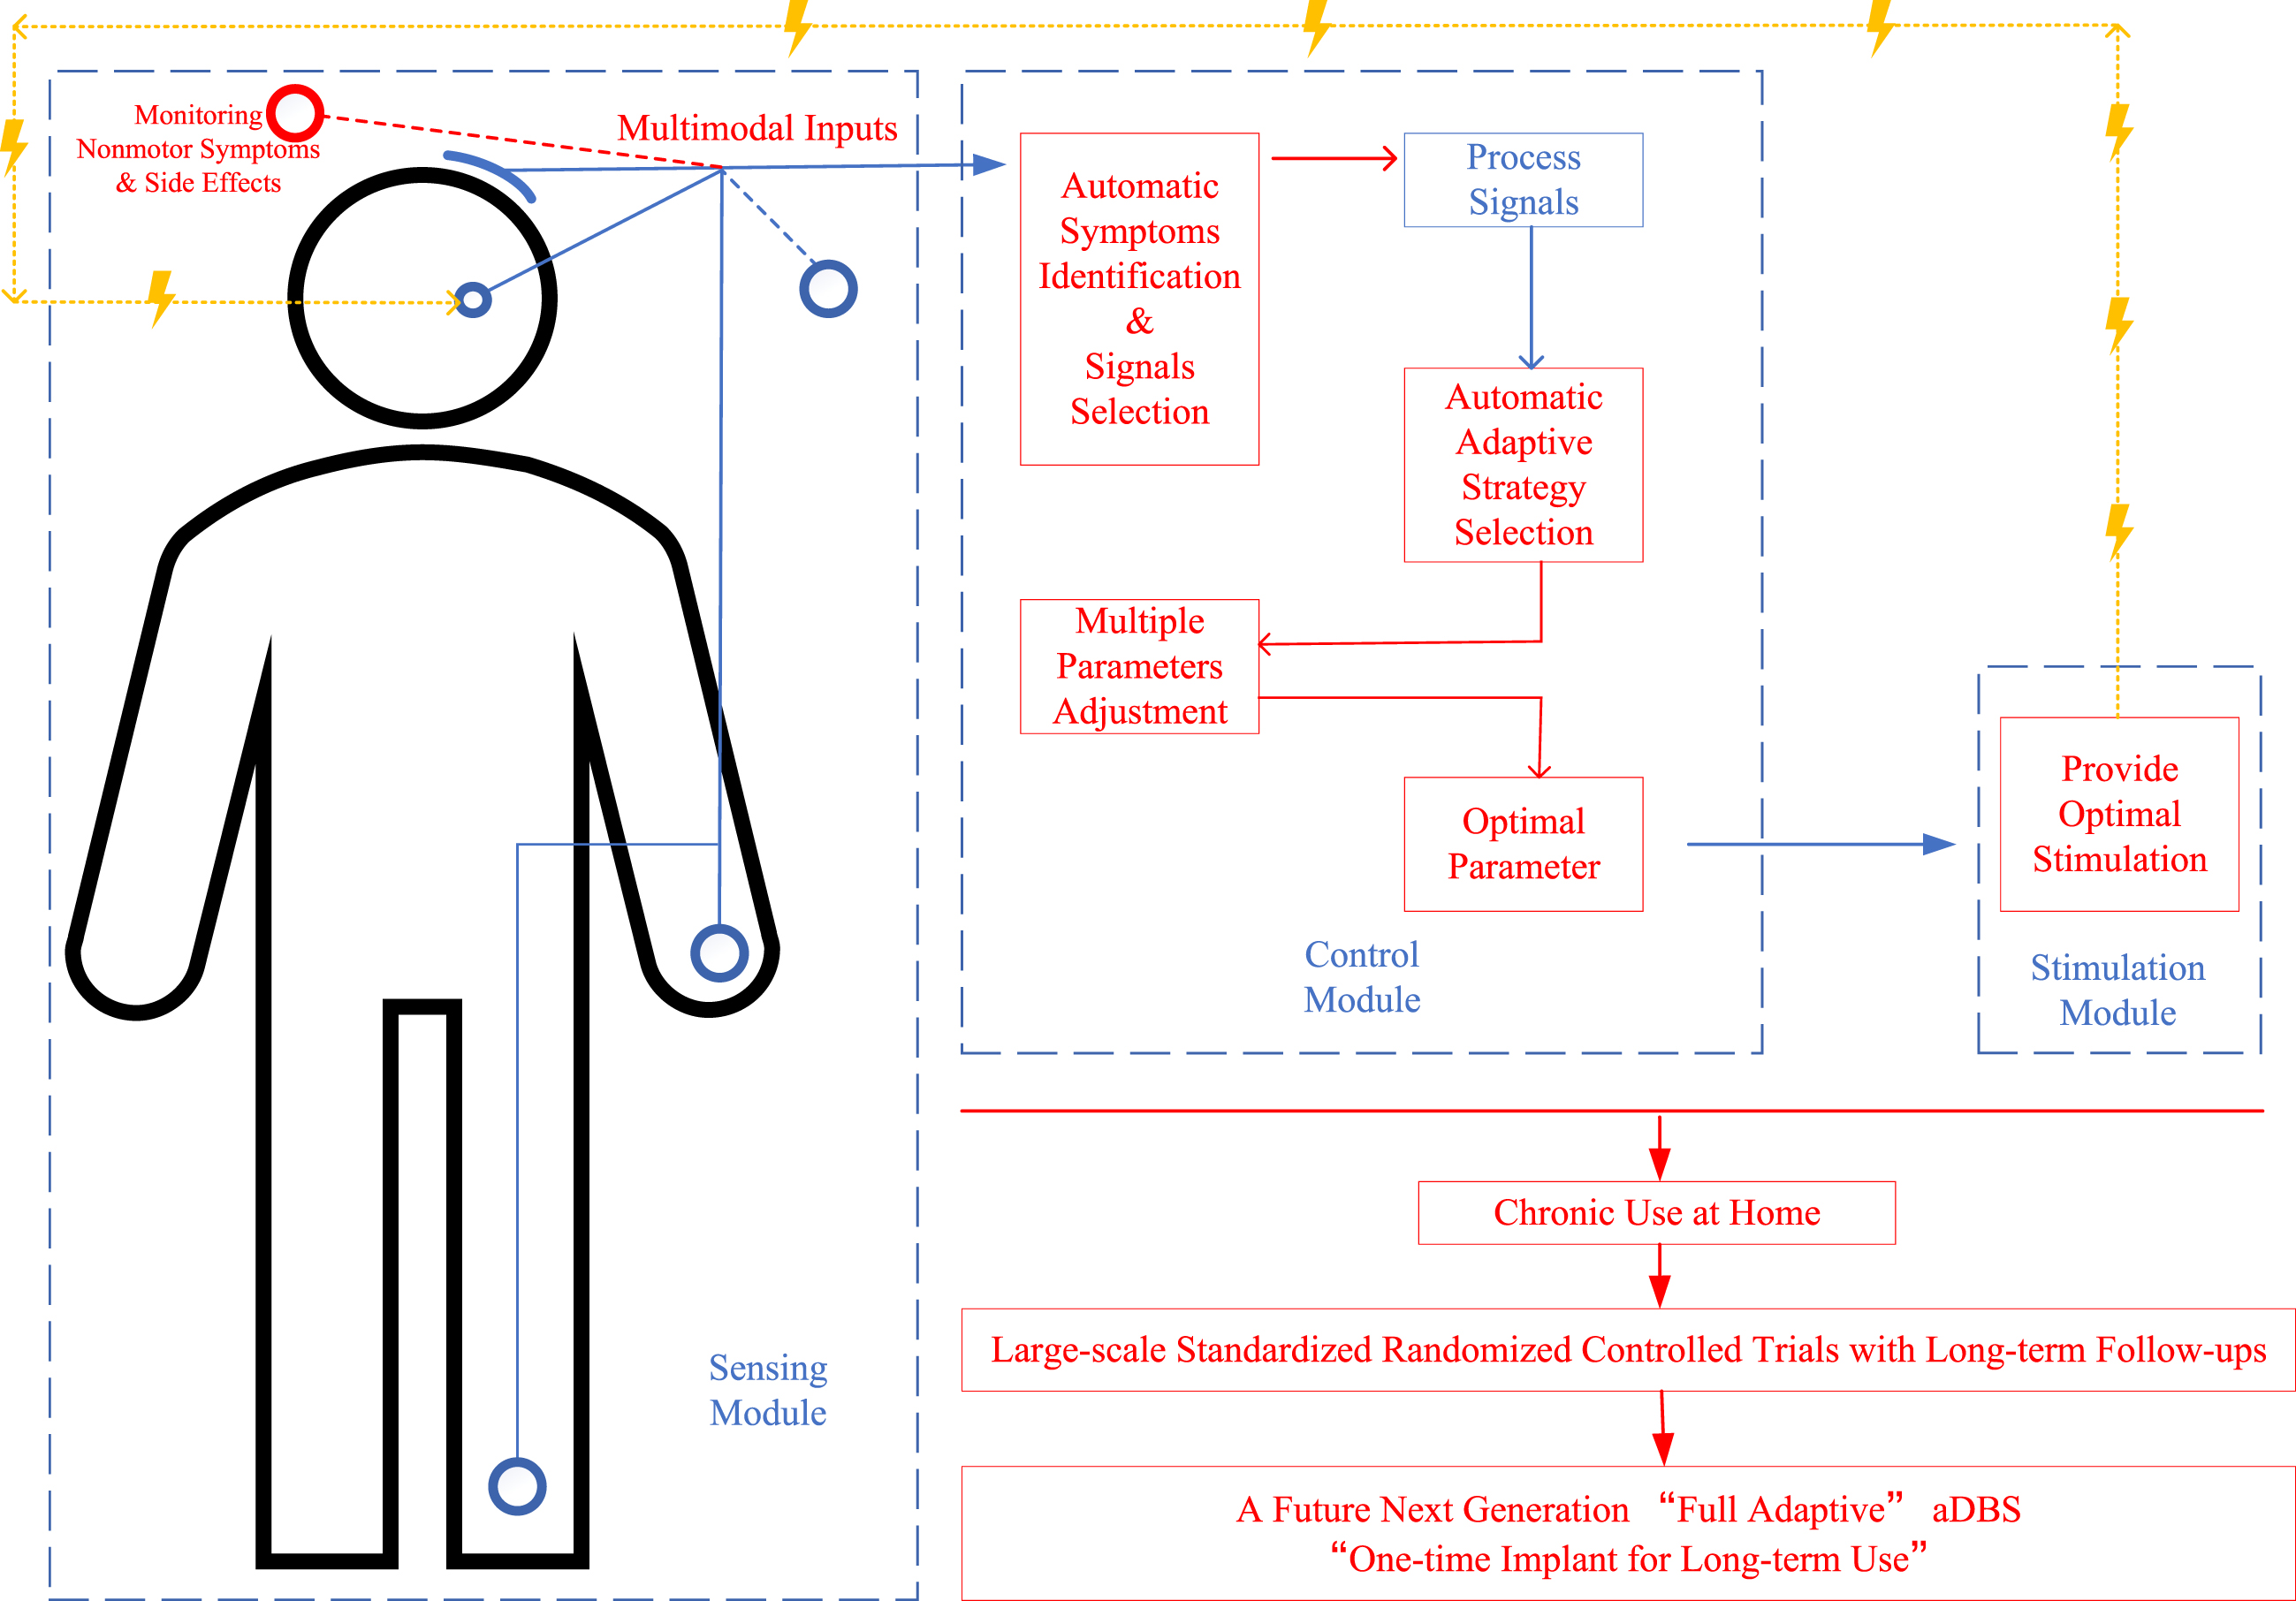 A diagrammatic sketch of a future next-generation “fully adaptive” deep brain stimulation (aDBS) design for Parkinson’s disease (PD) and its future key perspectives. Words and lines in red show the improvement perspectives, lines in blue show the signals line, and lines in yellow show the stimulation line; the figure shows the main procedures in monitoring multimodal inputs for identifying motor and nonmotor symptoms, analyzing optimal adaptive strategy and stimulation parameters, providing best optimal stimulation according to the input and feedback signals, and monitoring efficacy and side effects for further adaptation.